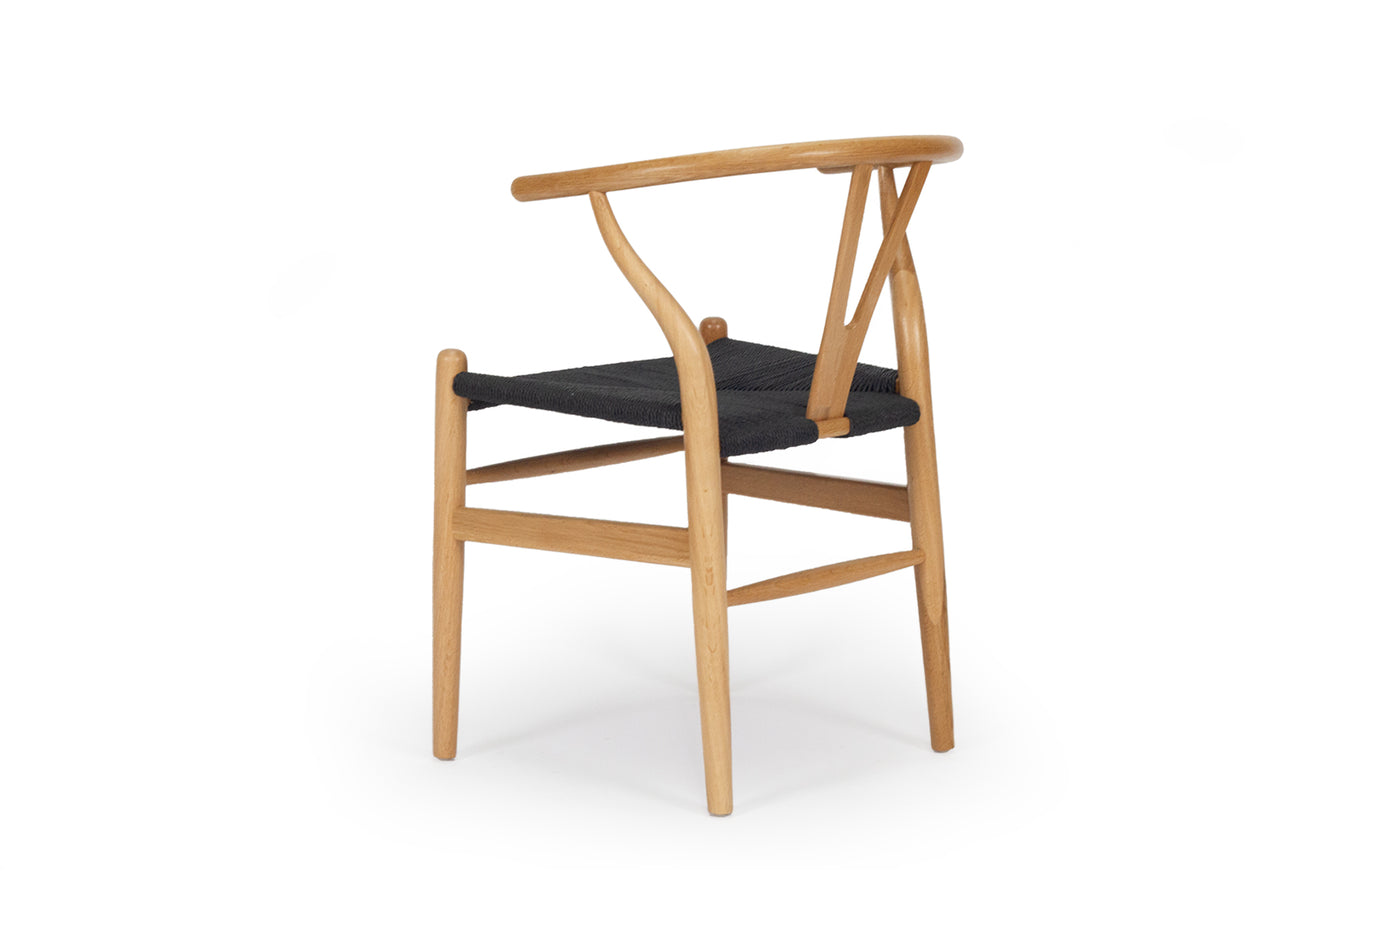 Cross Over Designer Chair - Natural Oak with Black Cord